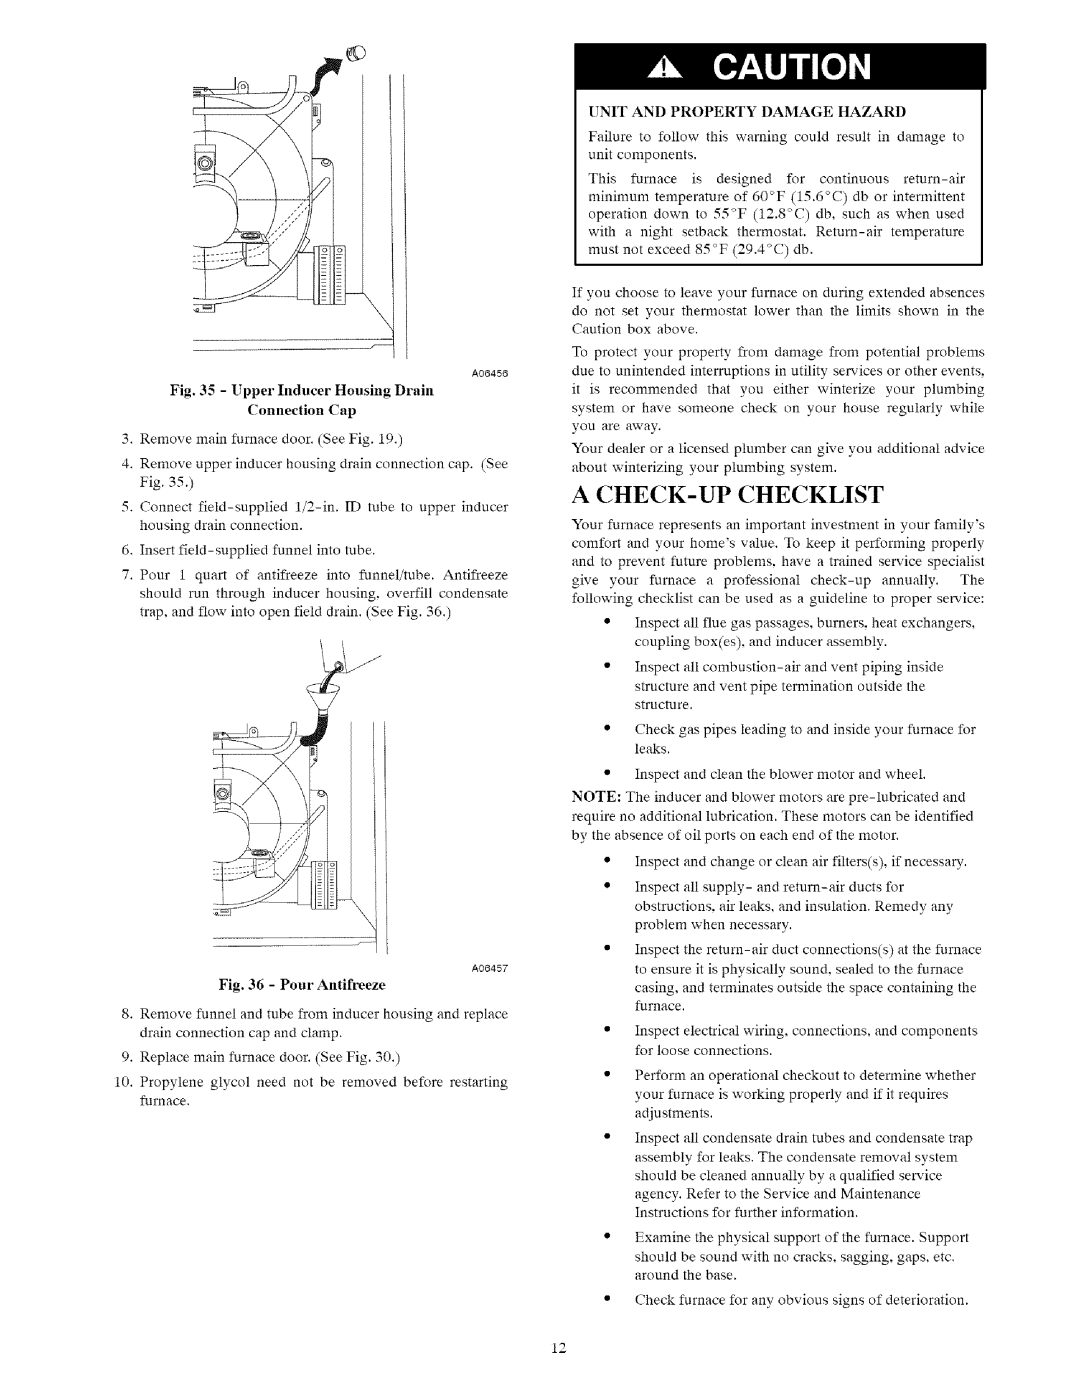 Carrier 58MVC owner manual A Check-Upchecklist, Upper Inducer Housing Drain, Unit And Property Damage Hazard 